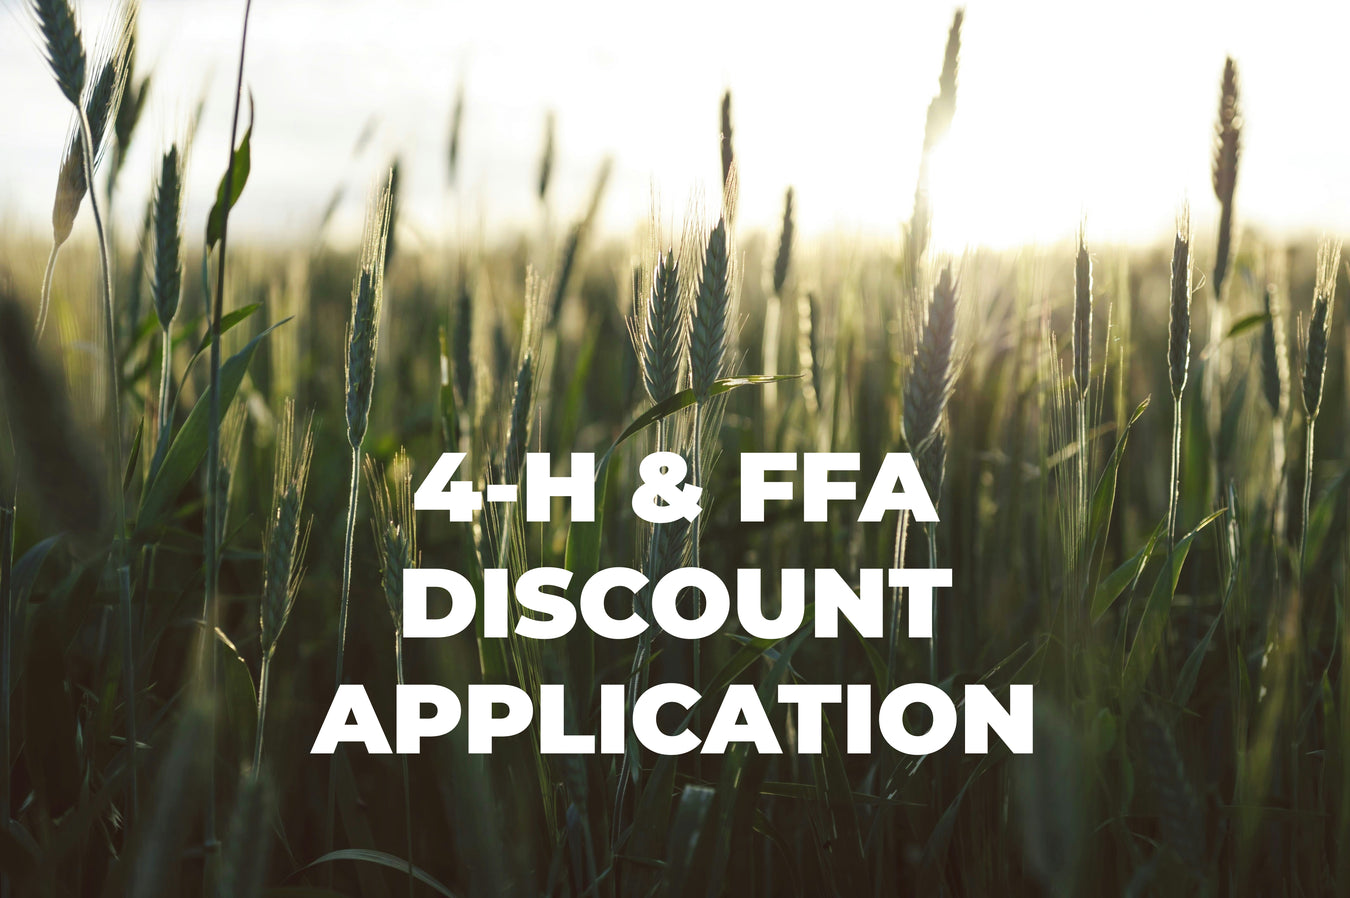 4-H and FFA Application link